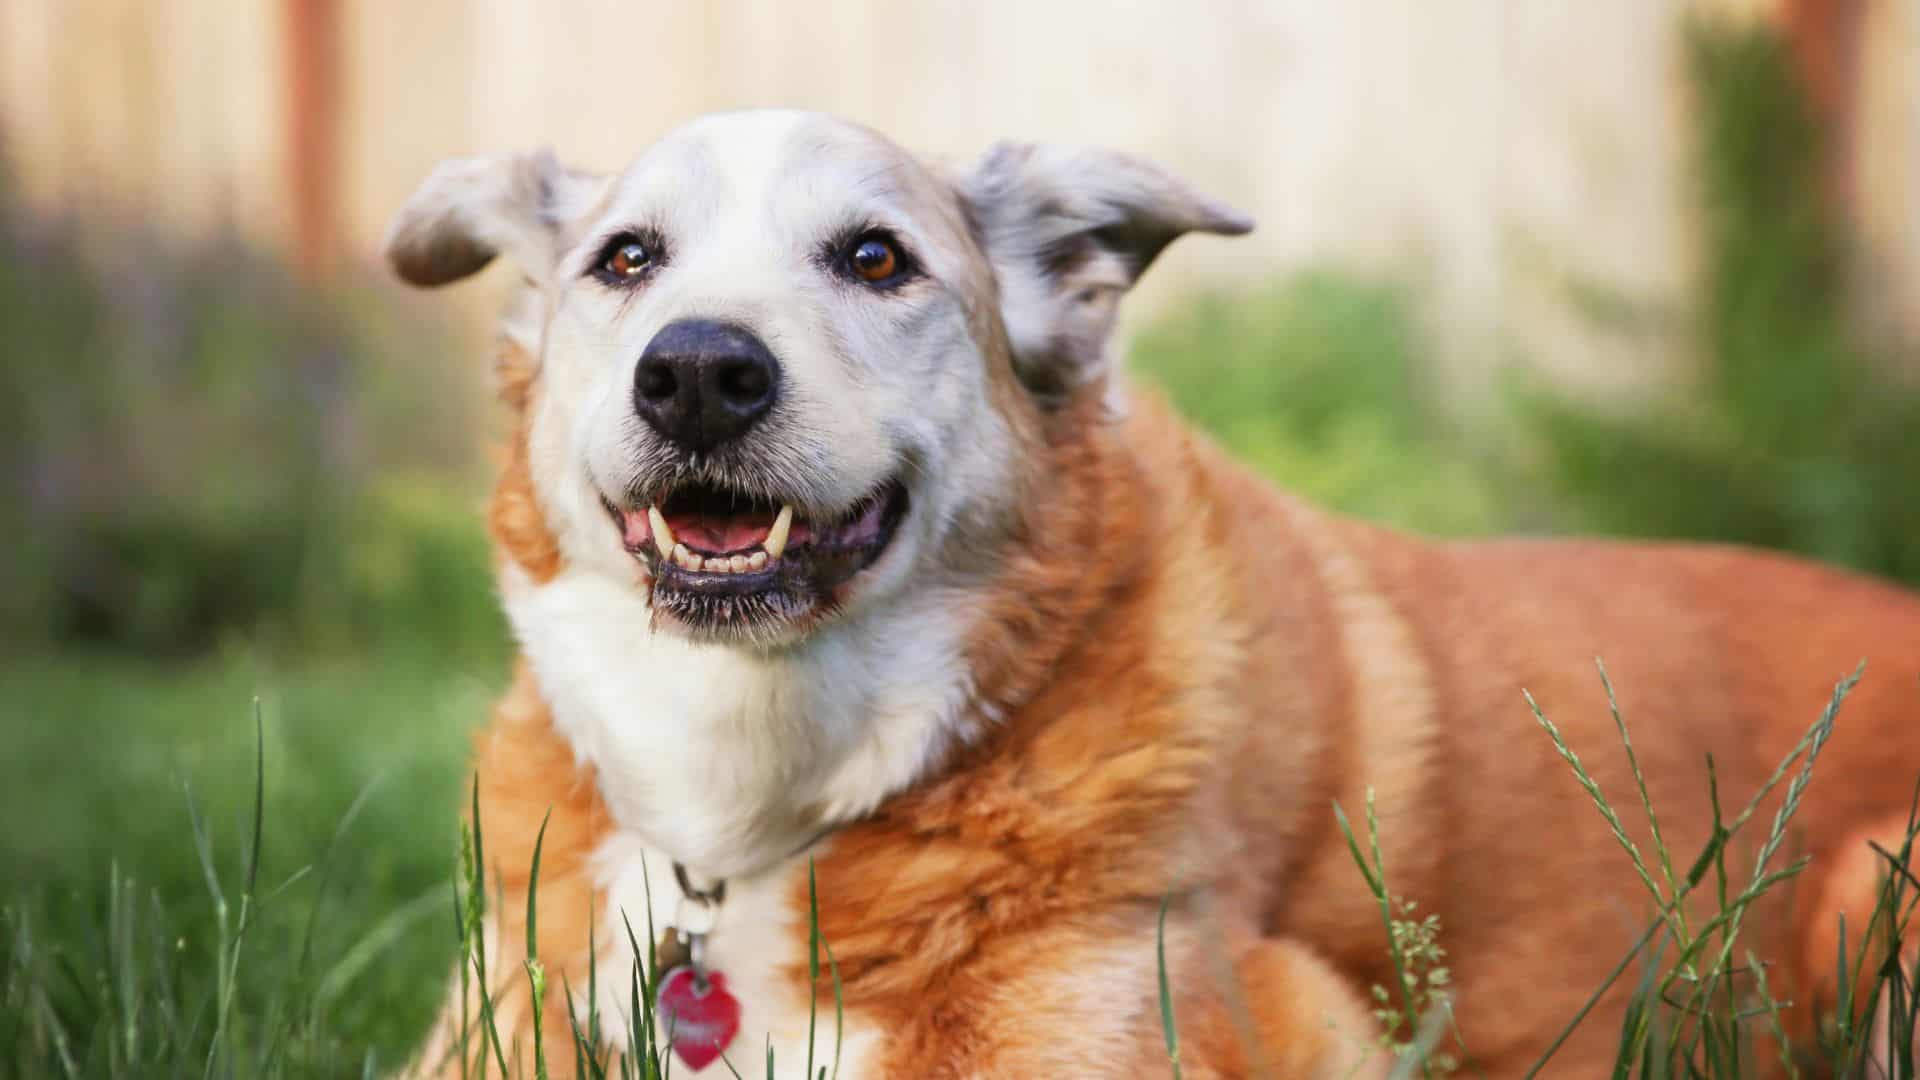 7 Adorable Reasons Why You Should Adopt An Older Dog